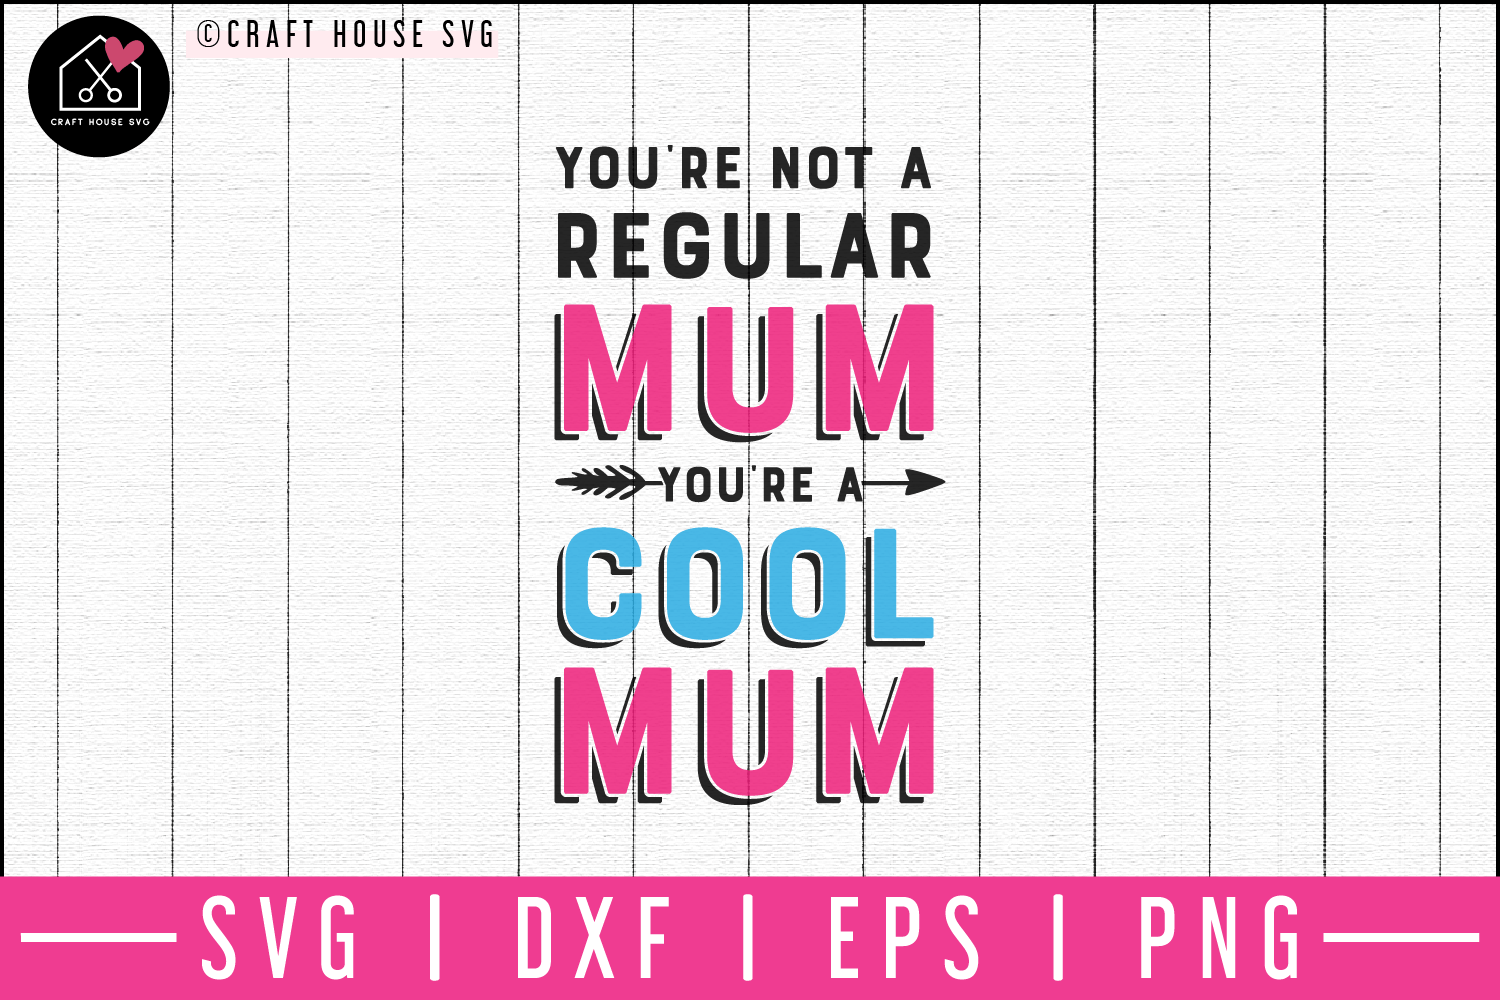 You are not a regular mom SVG | M52F Craft House SVG - SVG files for Cricut and Silhouette